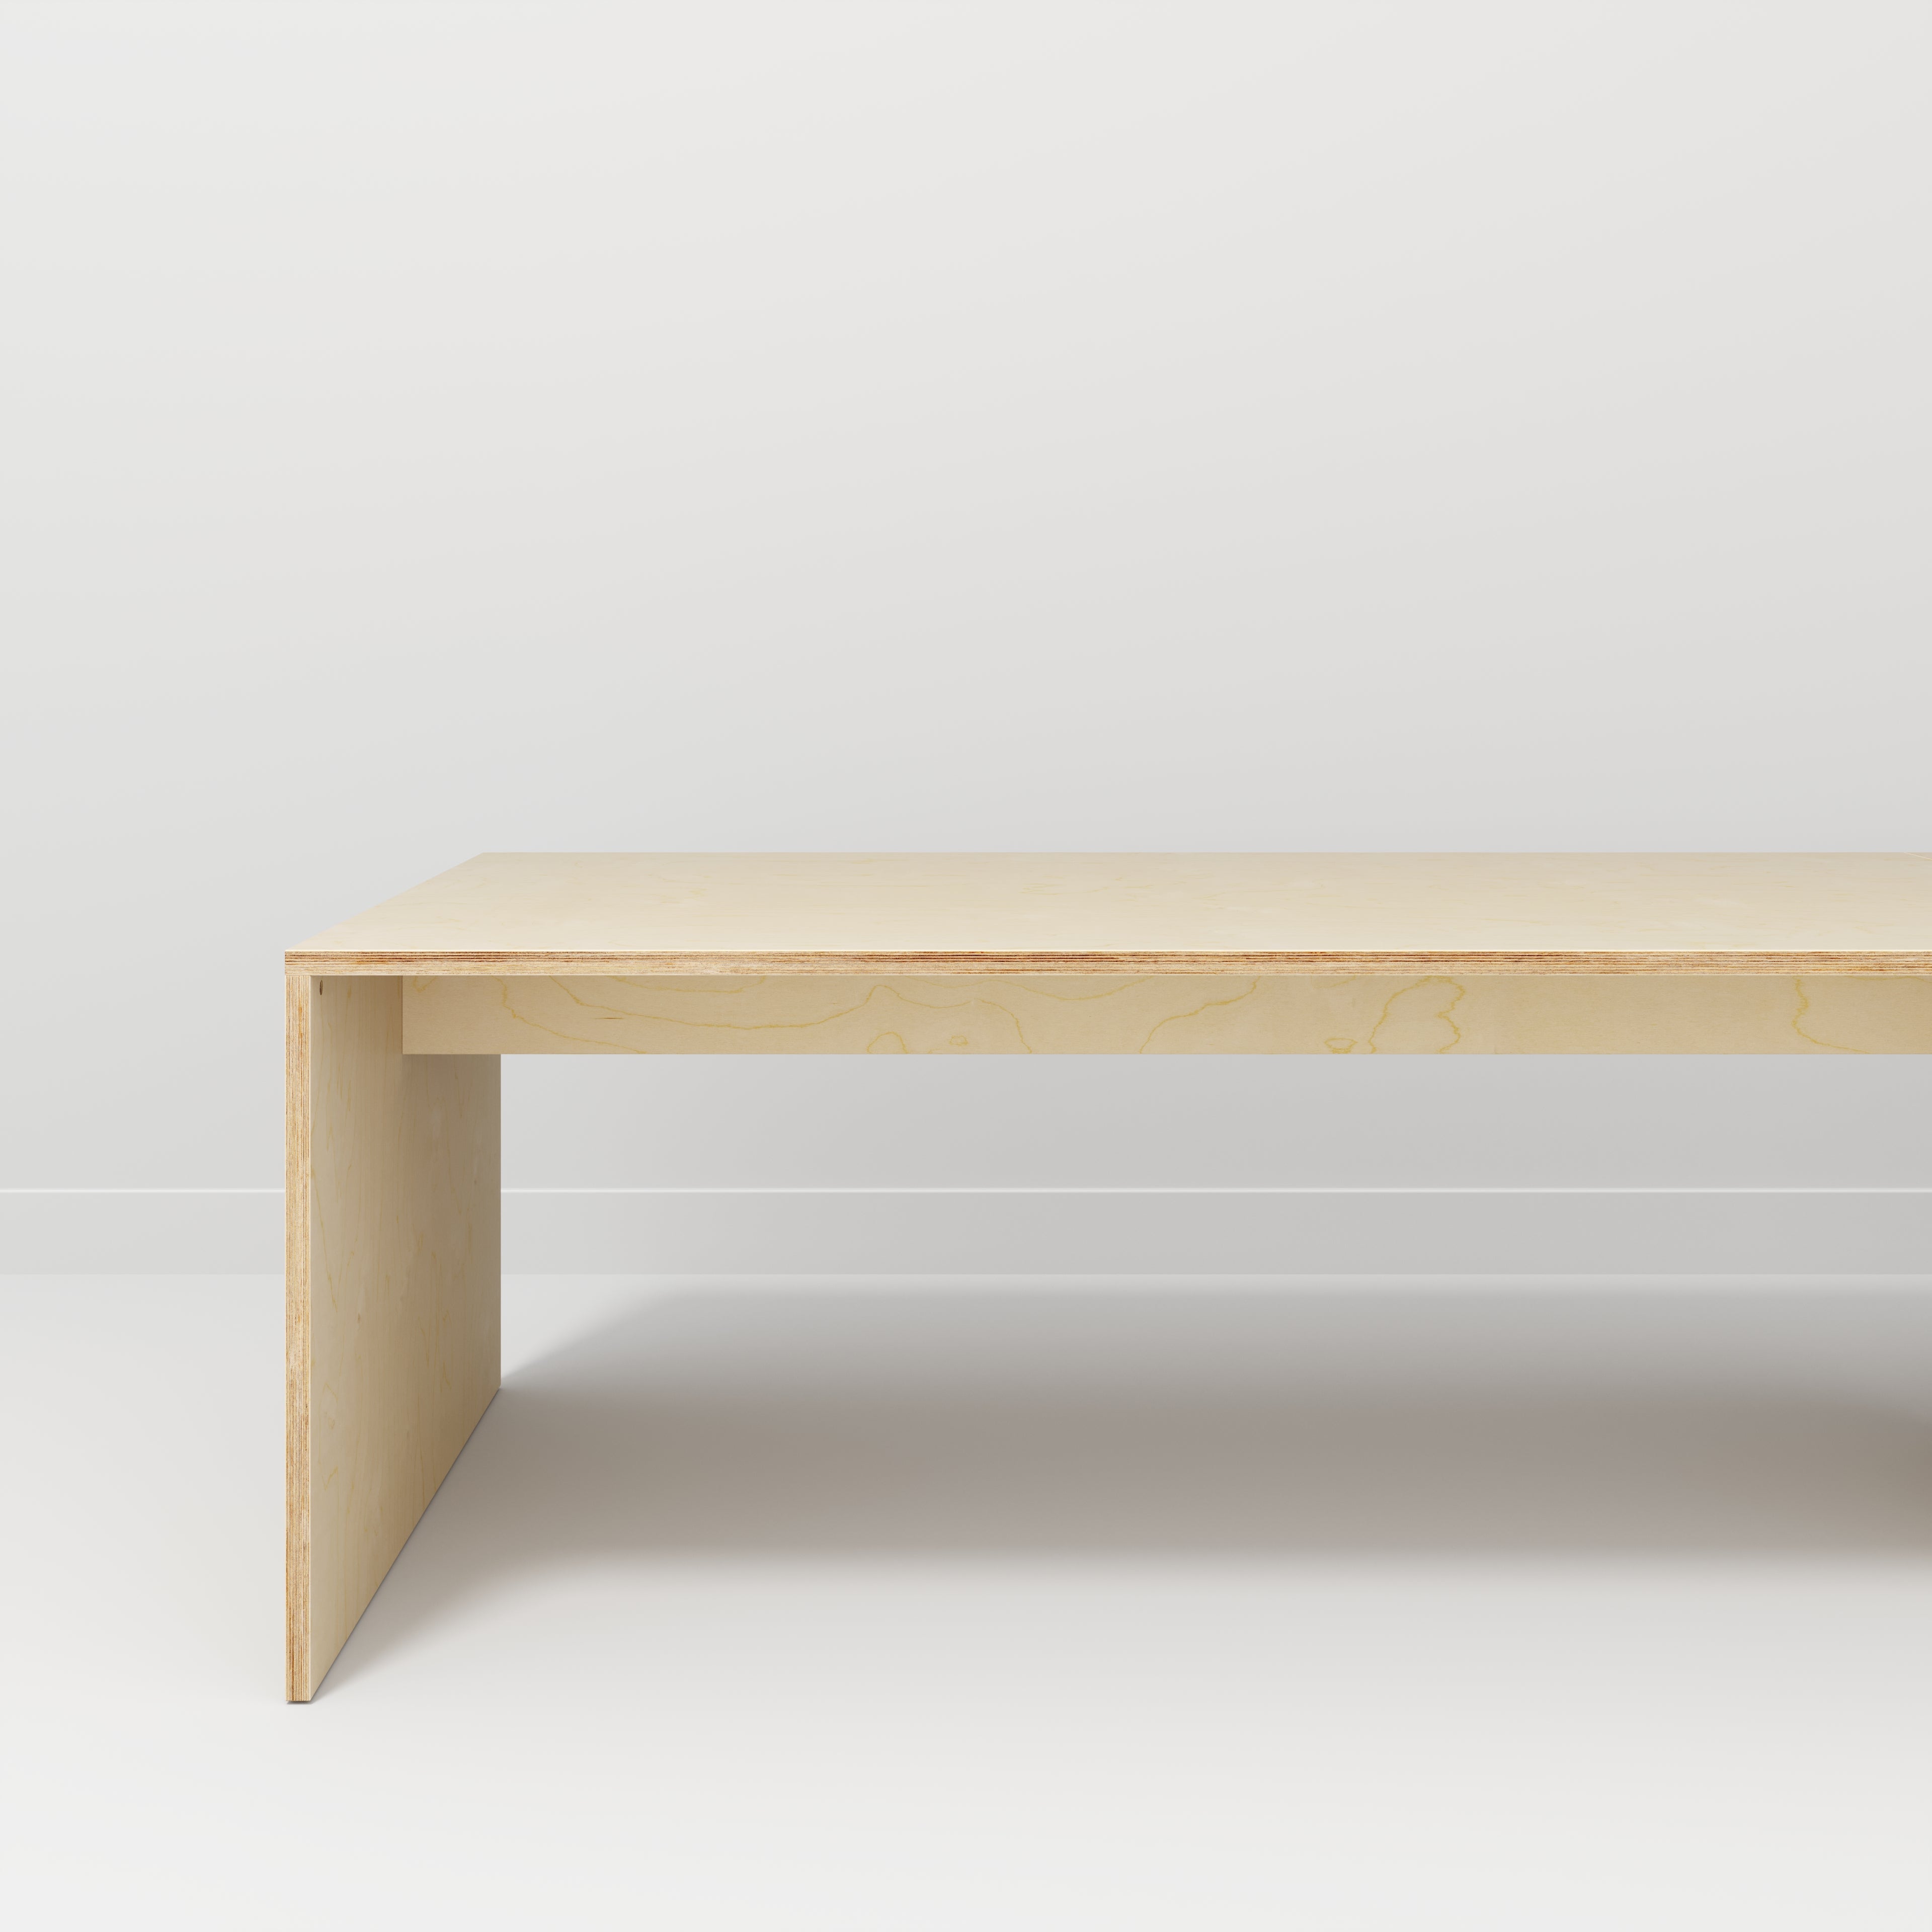 Custom Plywood Table with Solid Sides (Large)